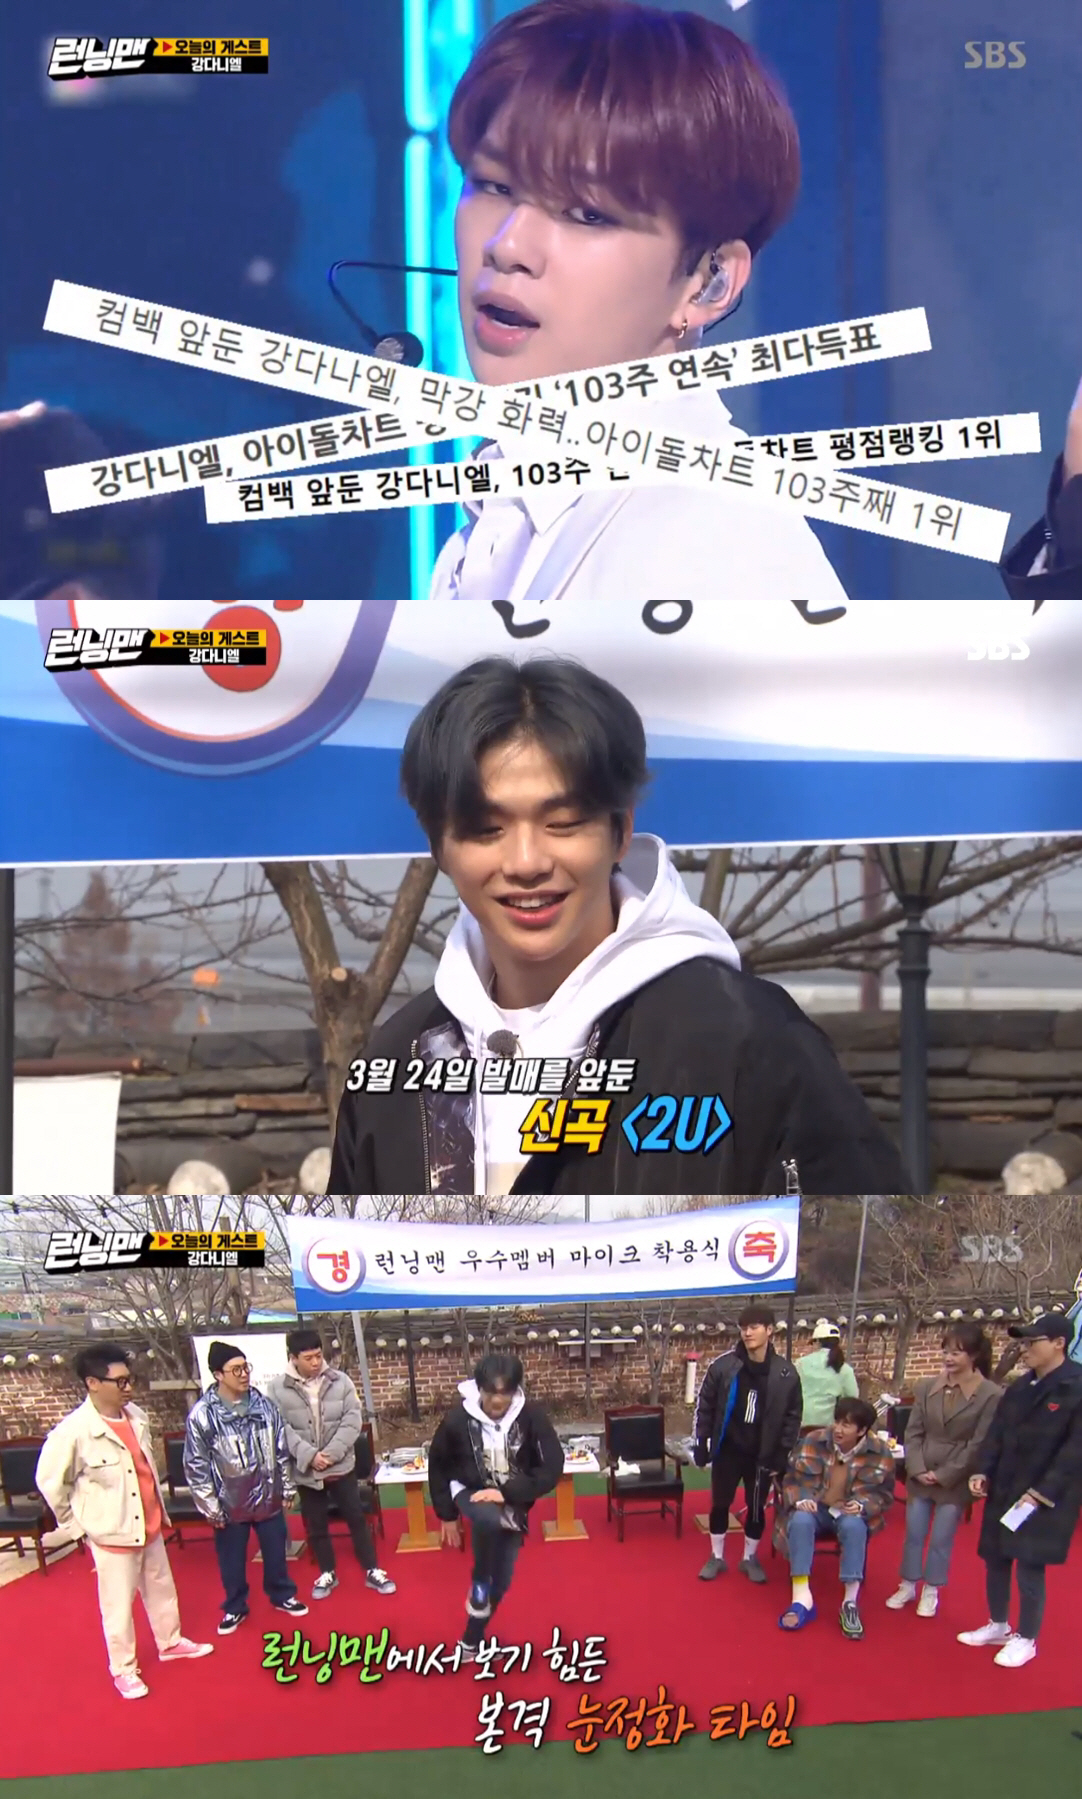 On SBS Running Man broadcasted on the 22nd, guest actors Lee Il-hwa, Hwang Young-hee, gag woman Park Mi-sun and singer Kang Daniel, who played an impressive mom in the work,On this day, Kang Daniel showed off his new song 2U from the opening, capturing the attention of viewers. The members could not hide their excitement in the grooved beat and dance that matches the warm spring.Kang Daniel recently said, We are preparing for a comeback in earnest. Thank you for calling me for a long time.Meanwhile, Kang Daniel will release his first mini album CYAN at 6 pm on the 24th.At 8 pm on the same day, Mnet will host Kang Daniel comeback show CYAN.